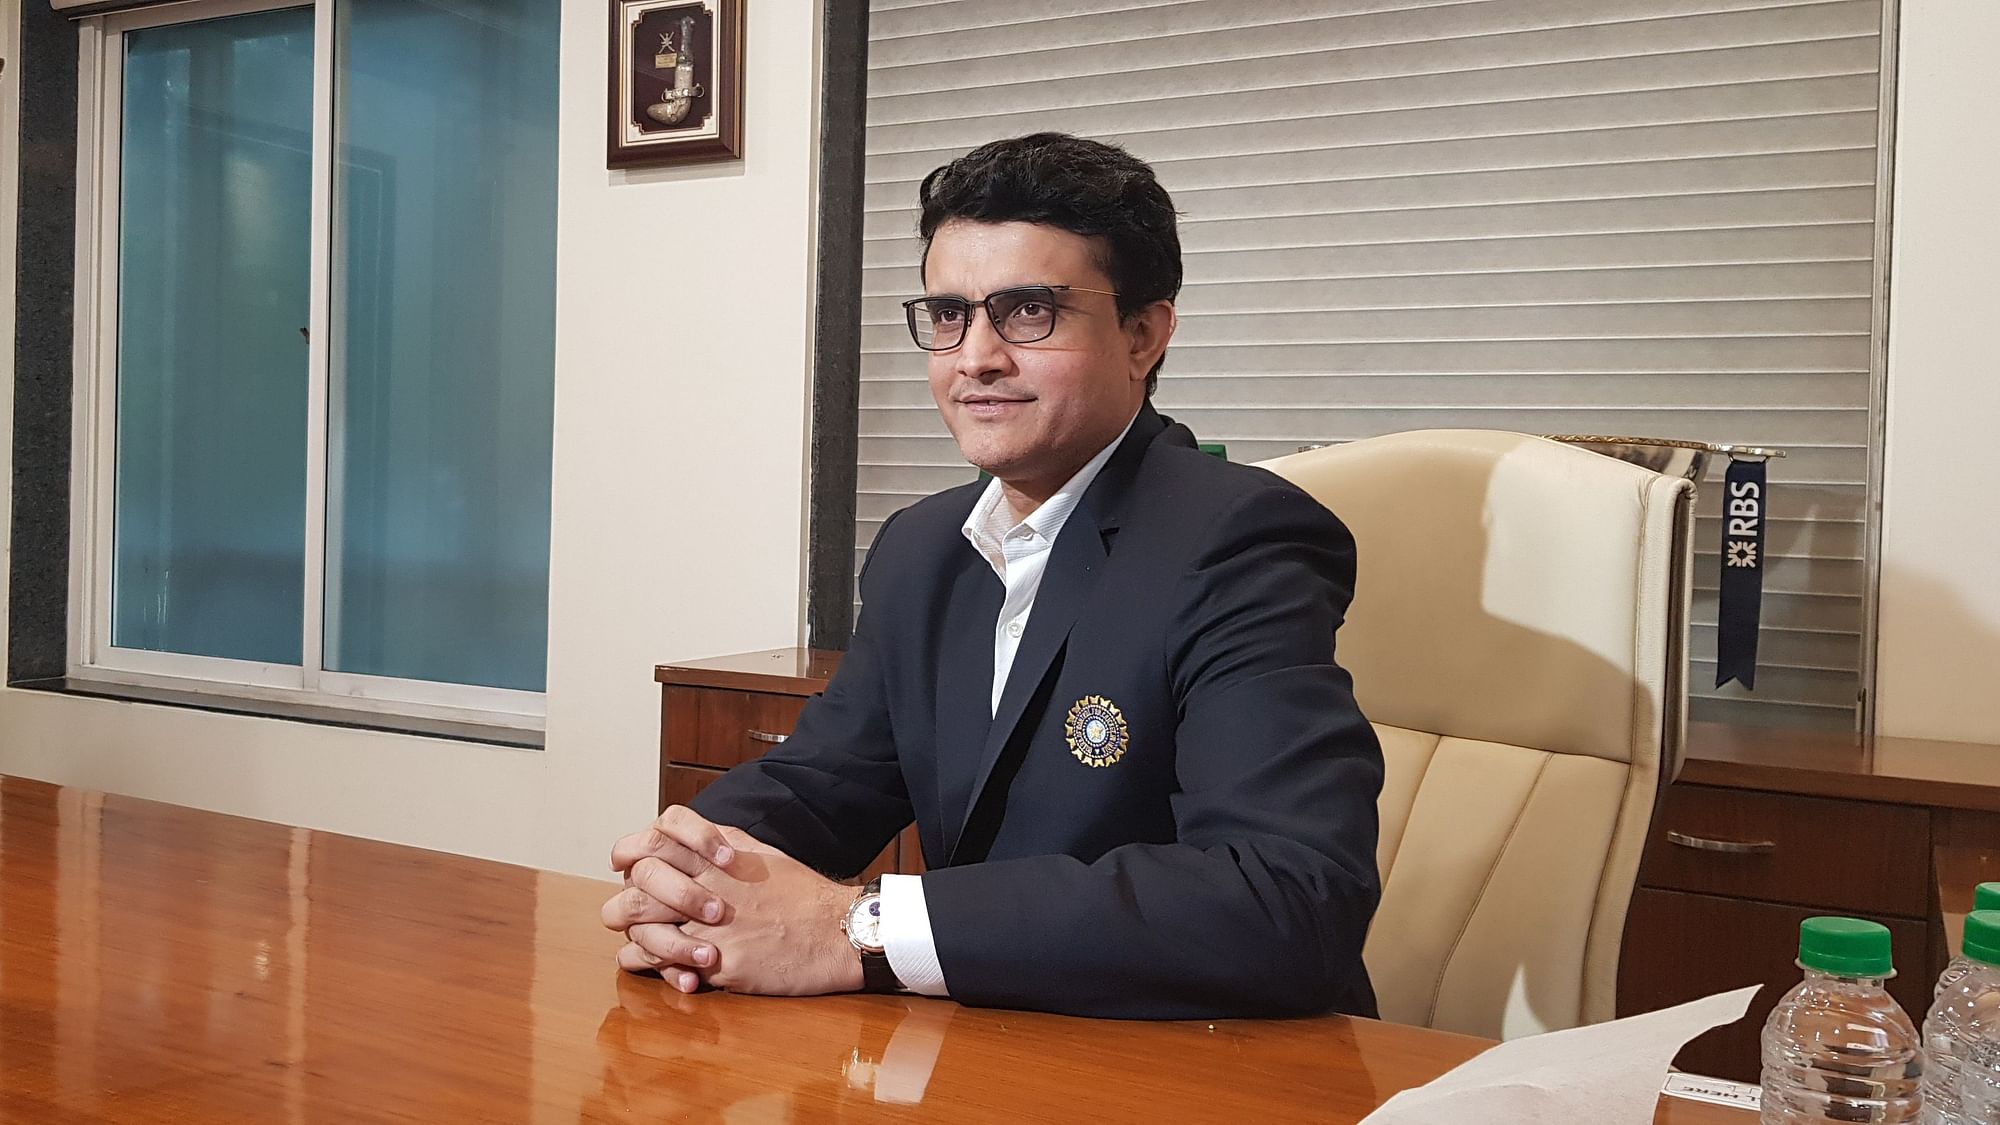 Former India captain Sourav Ganguly had taken charge as BCCI president in October last year.